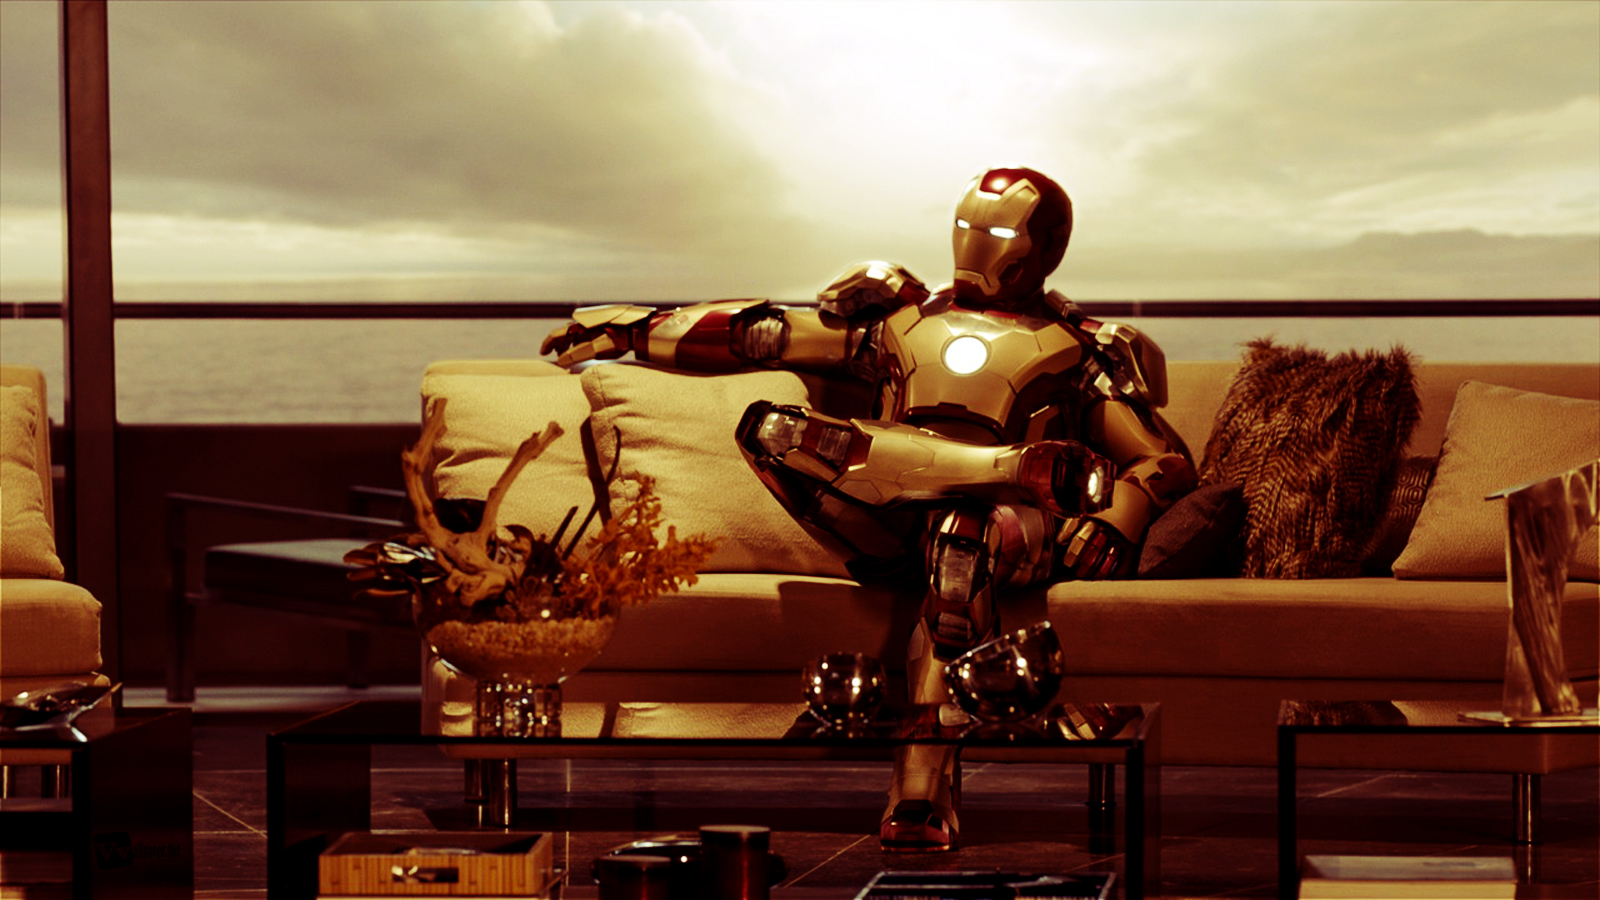 Iron Man Movie HD Wallpaper And Poster